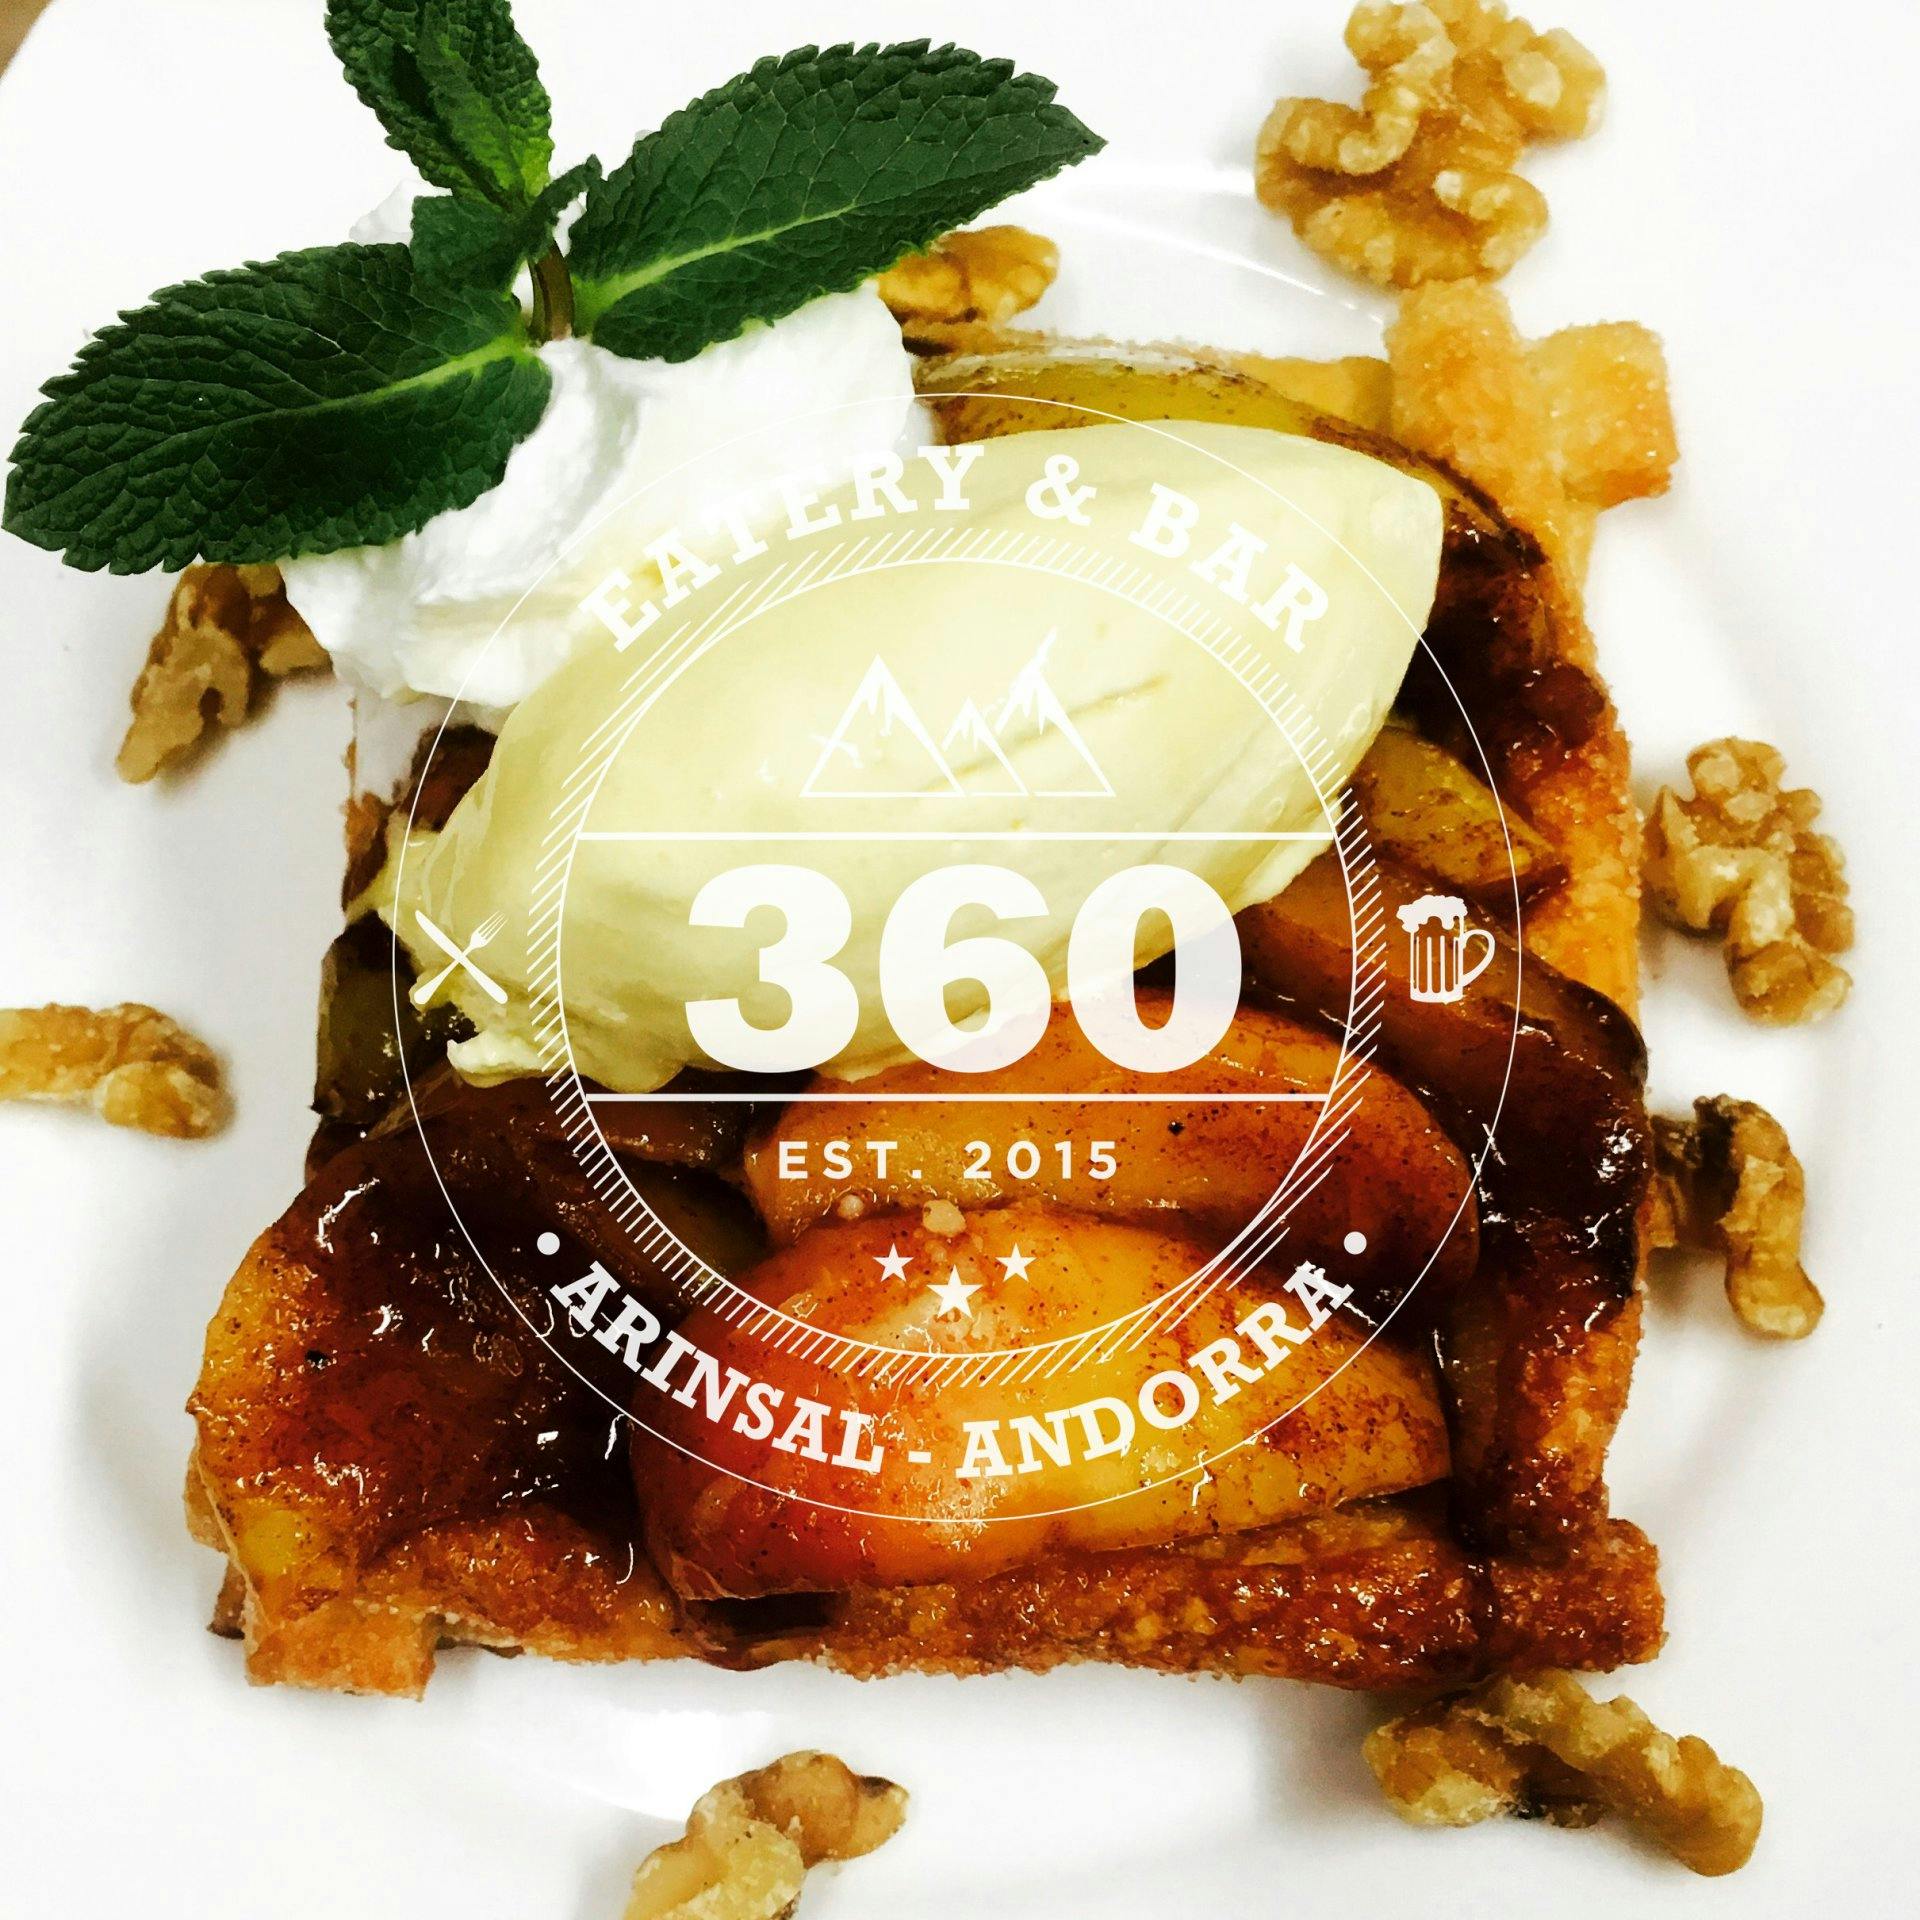 See Restaurant Bar 360 in Arinsal | Place | Hangout on Holiday